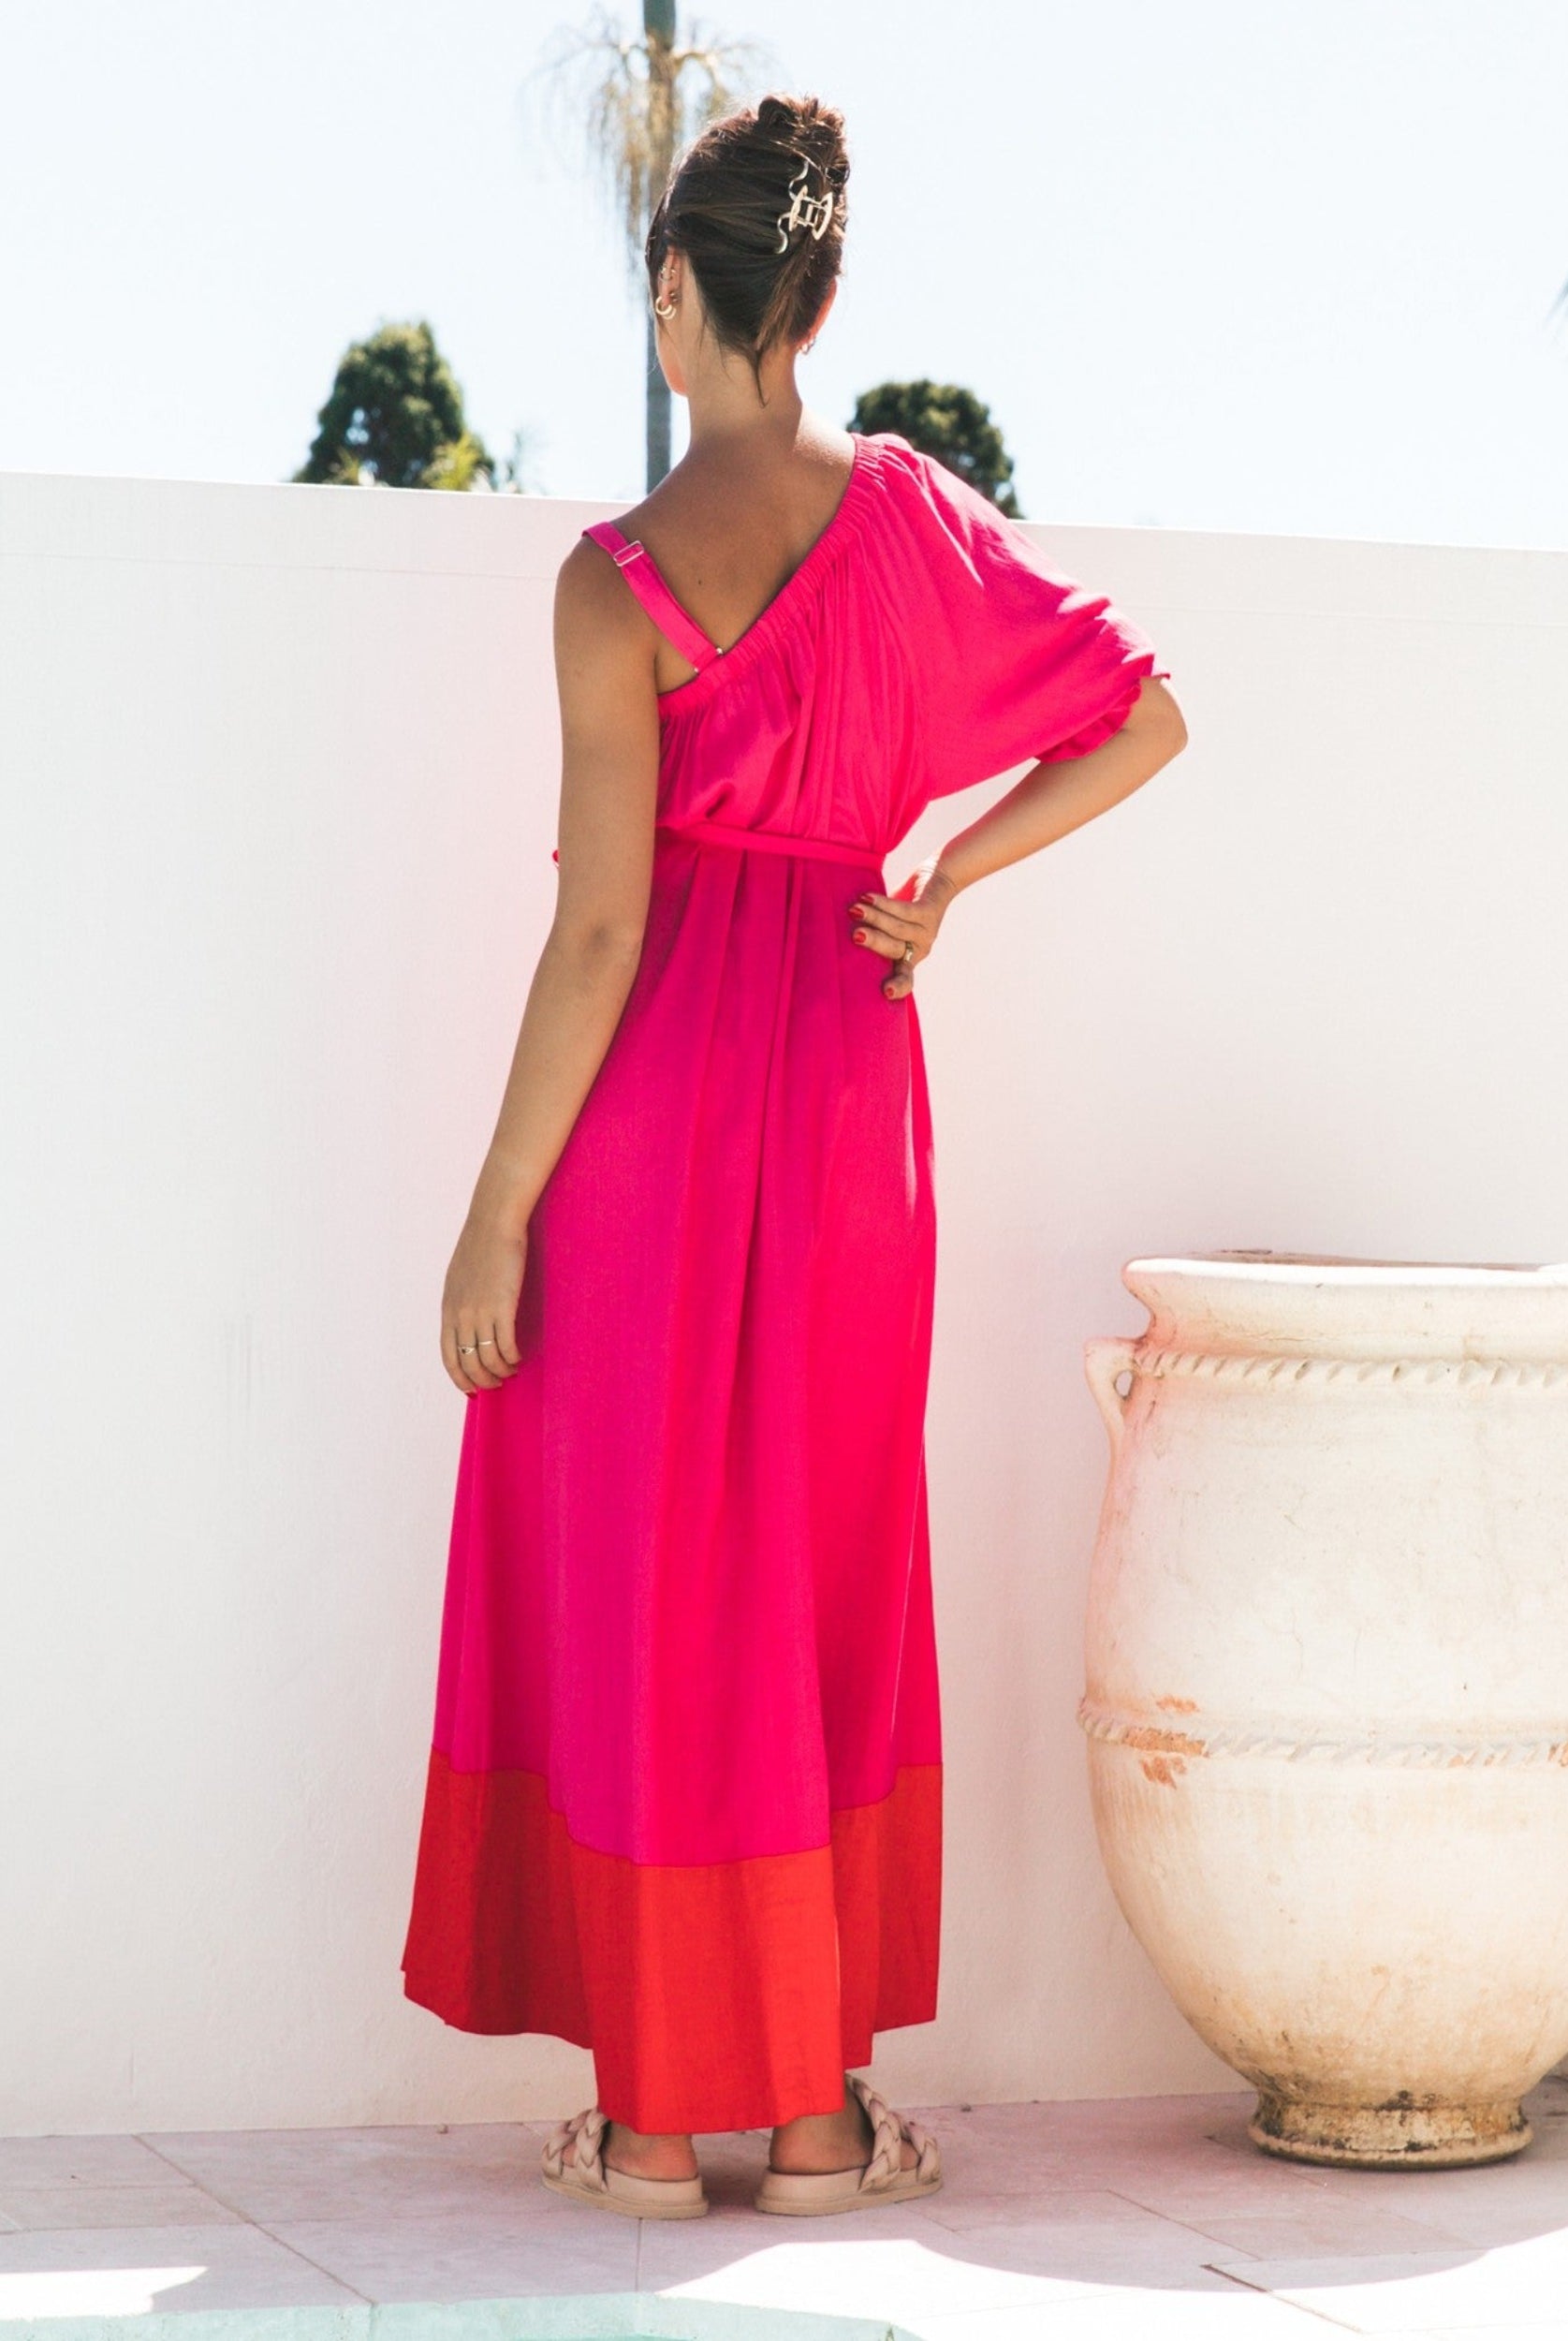 Colour block maxi dress from Label of Love 